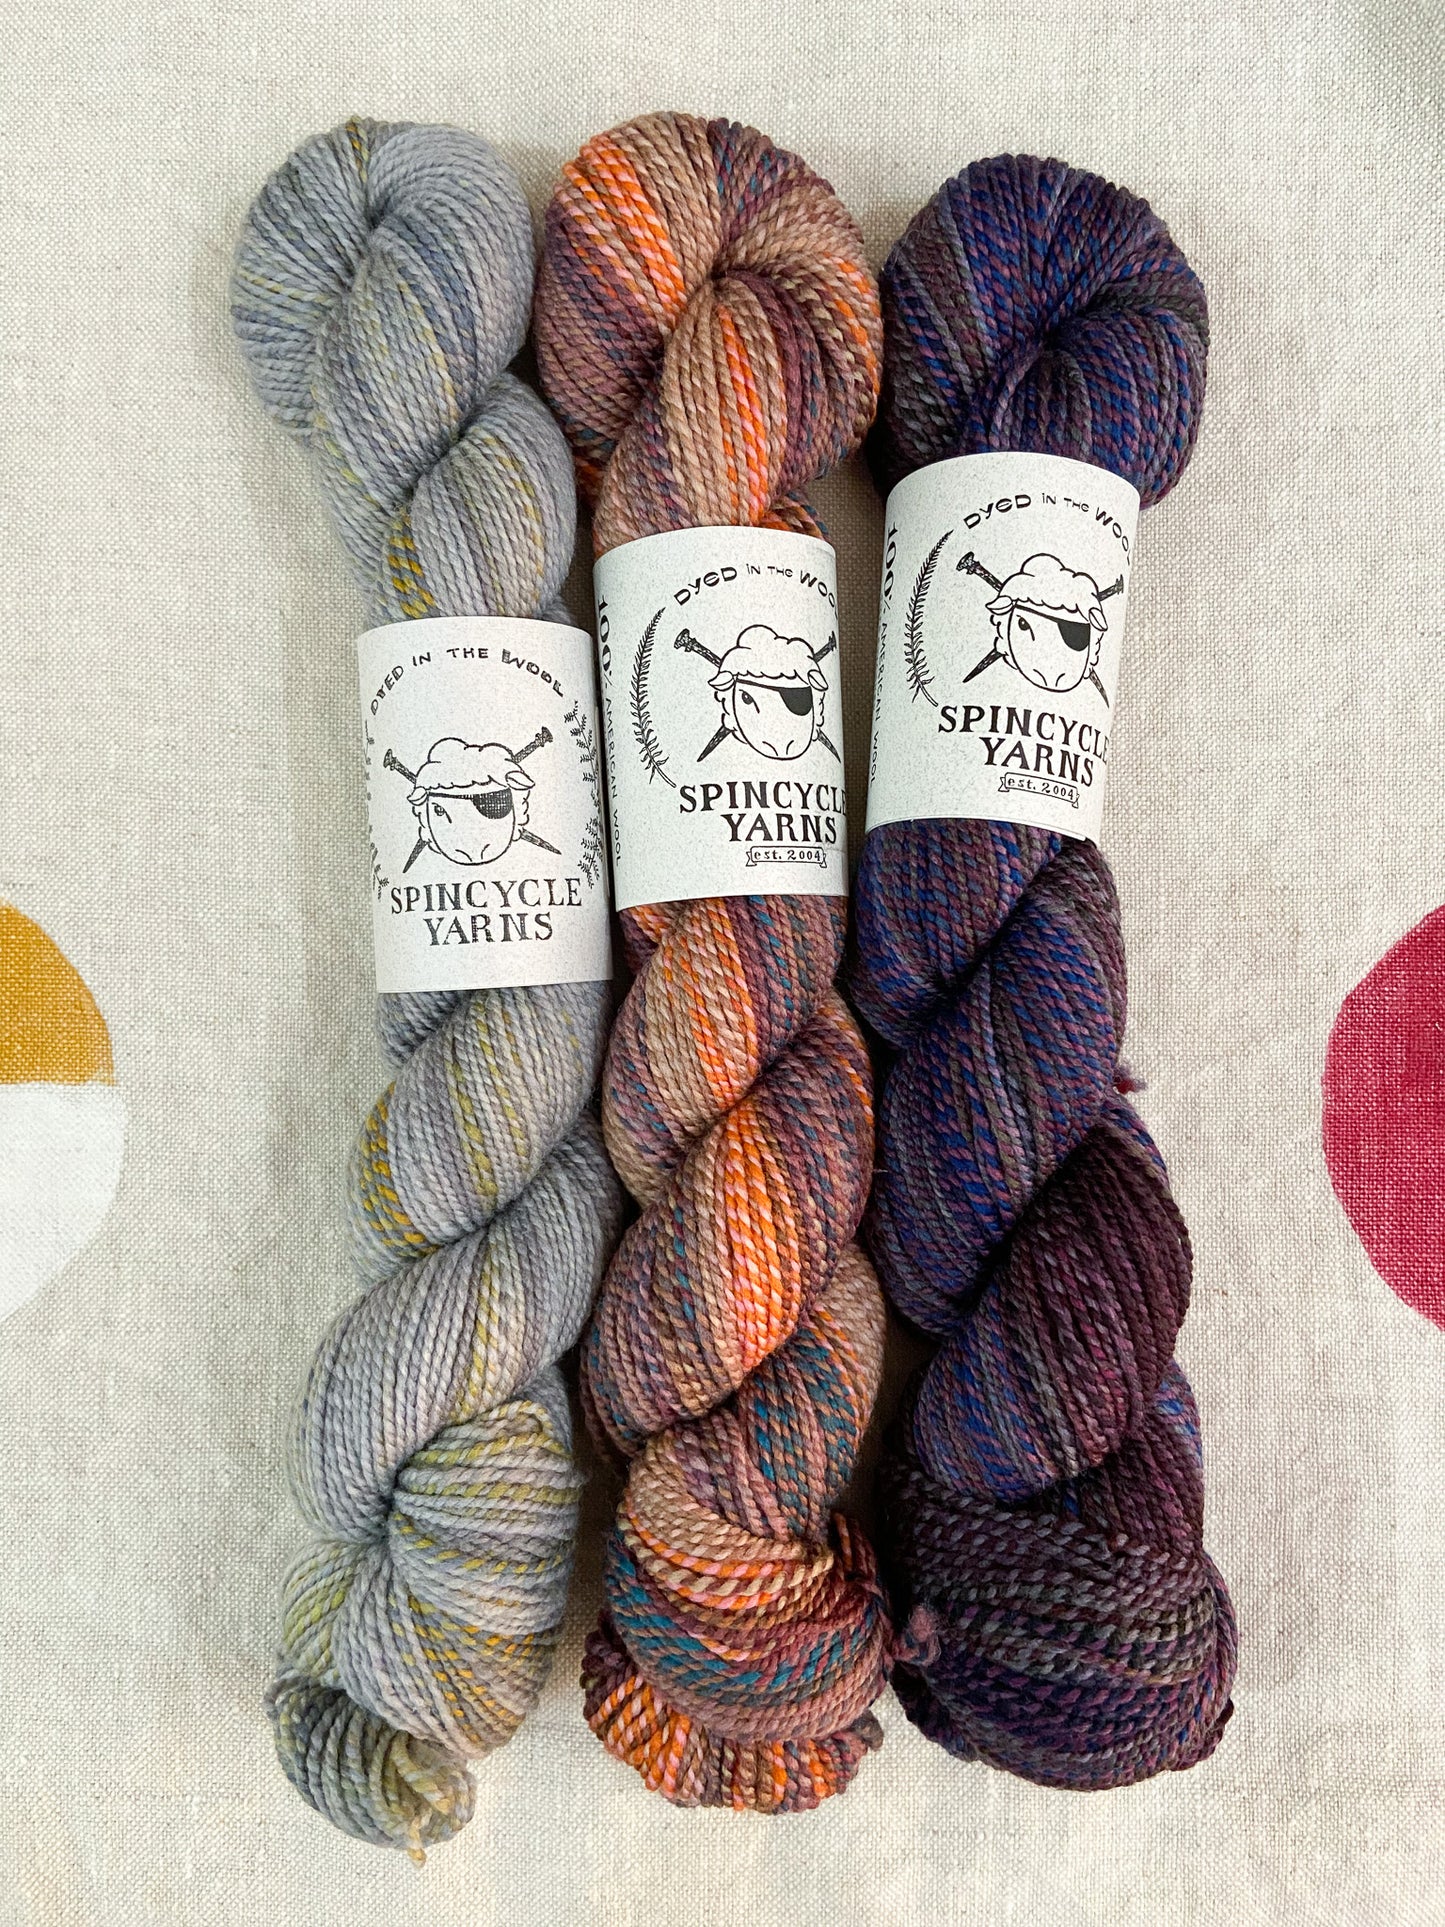 Shift Cowl Kits in Assorted Colors with Spincycle Dyed in the Wool